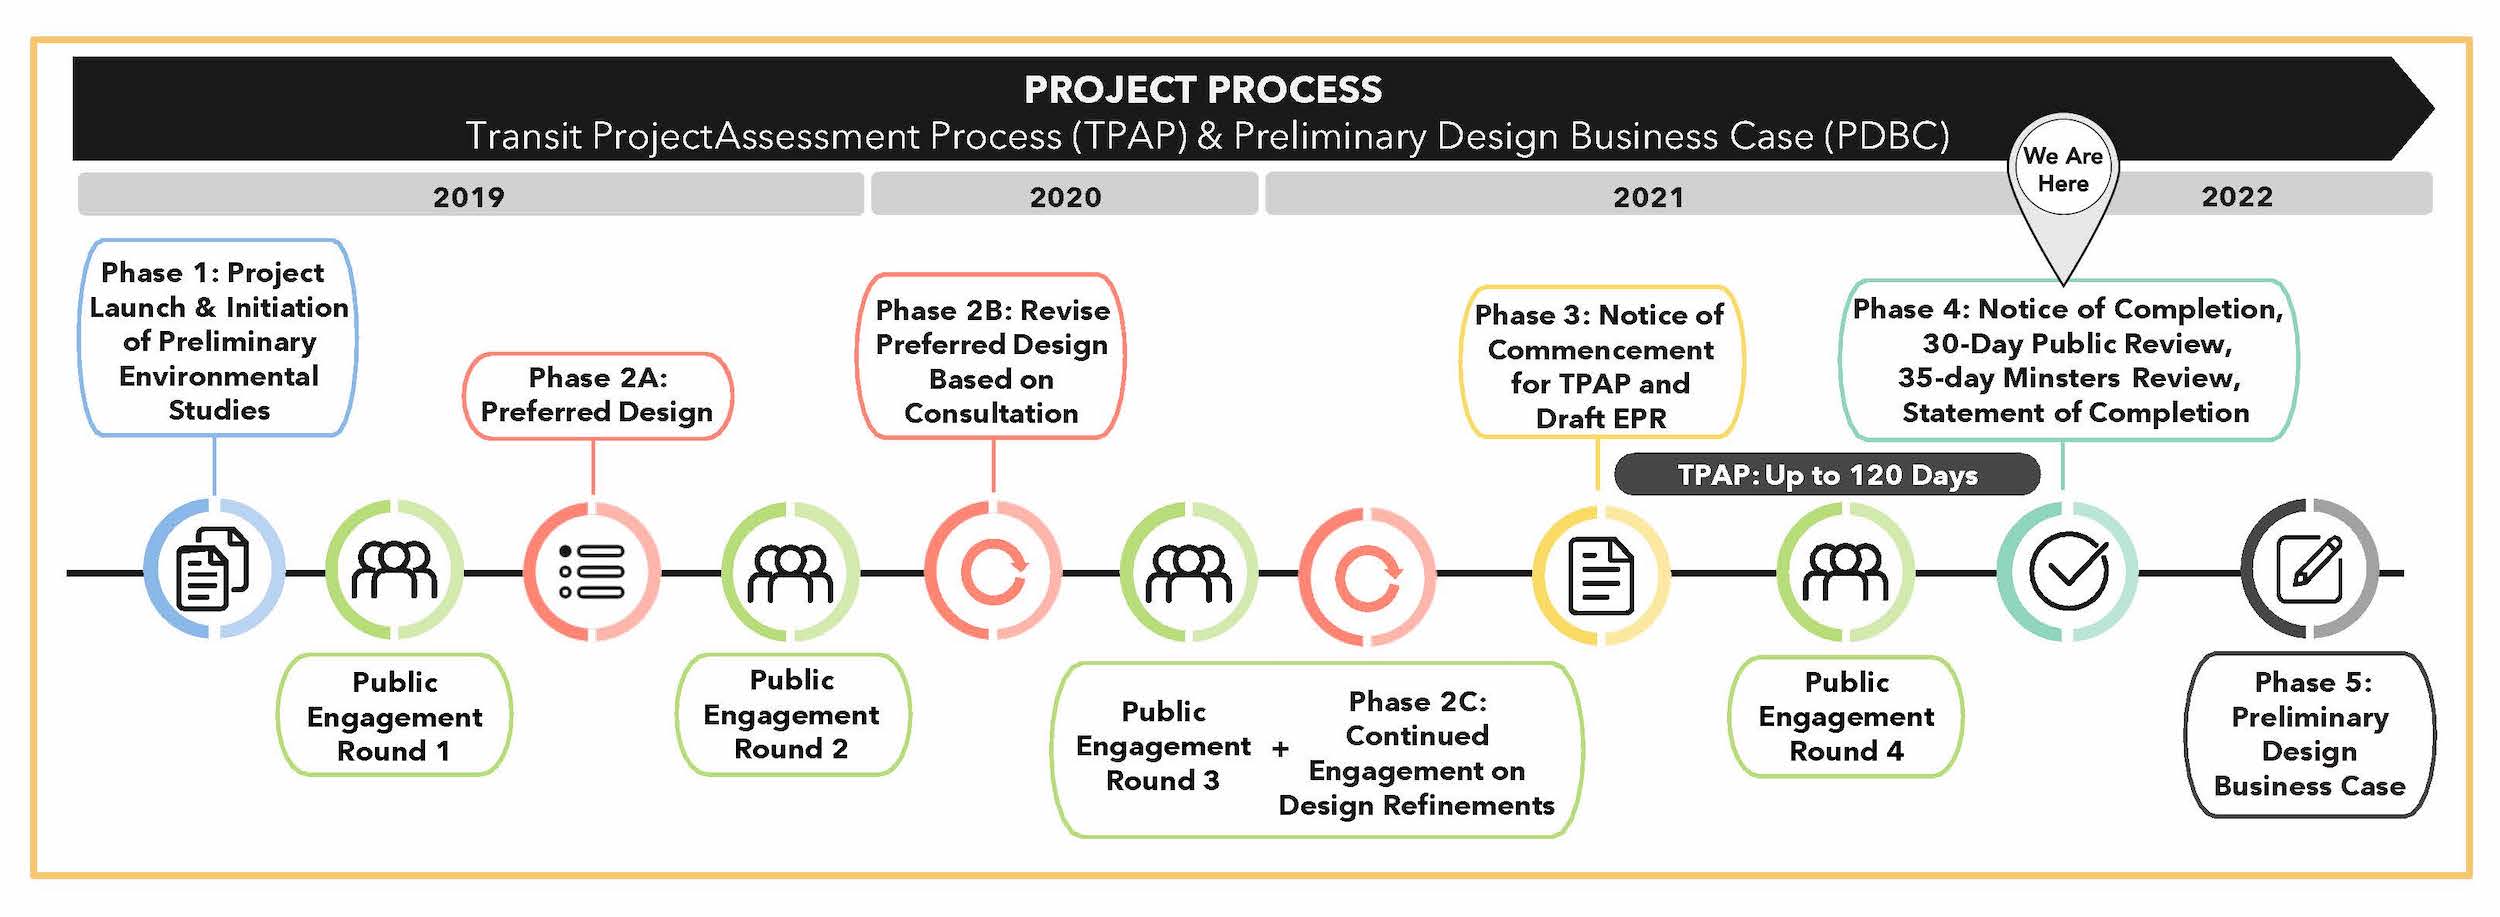 Timeline displaying the various stages of the transit project assessment process. We are currentl...